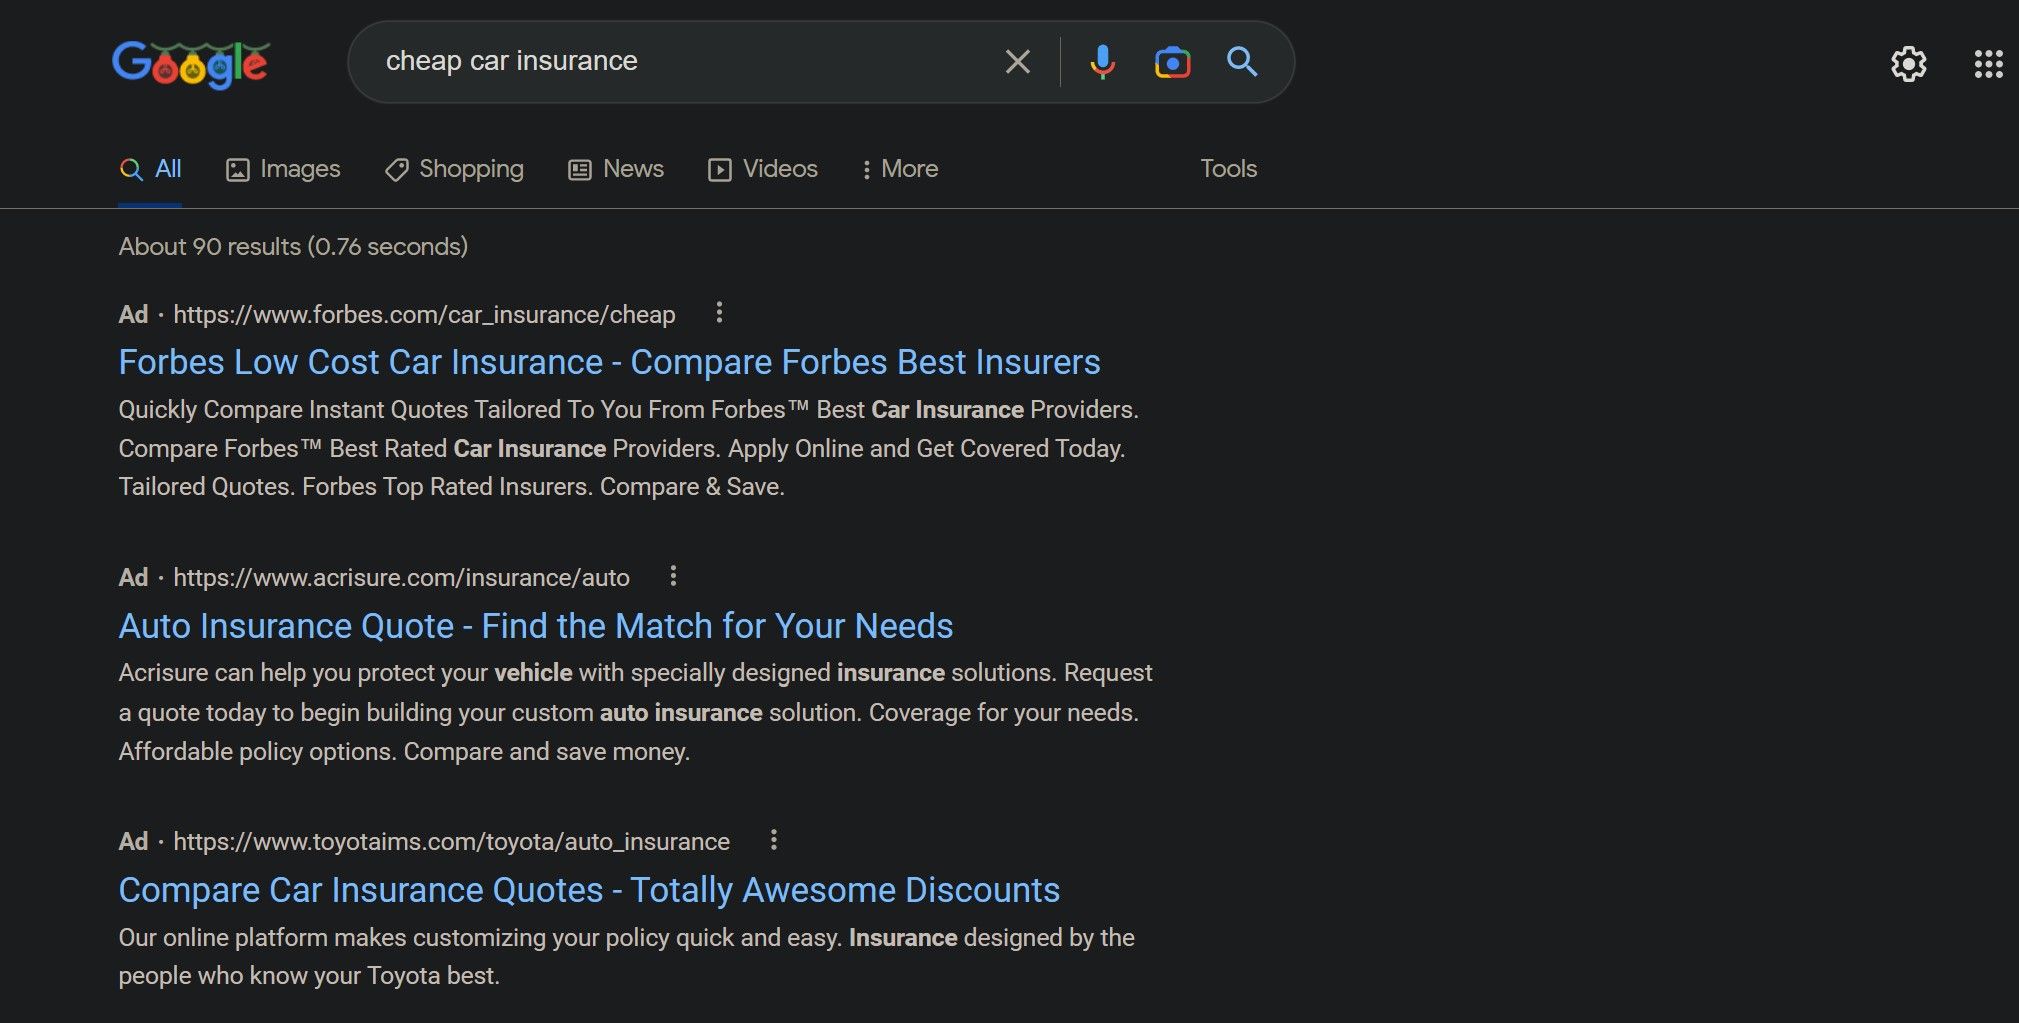 Google search engine showing paid search results for cheap car insurance keywords in Chrome